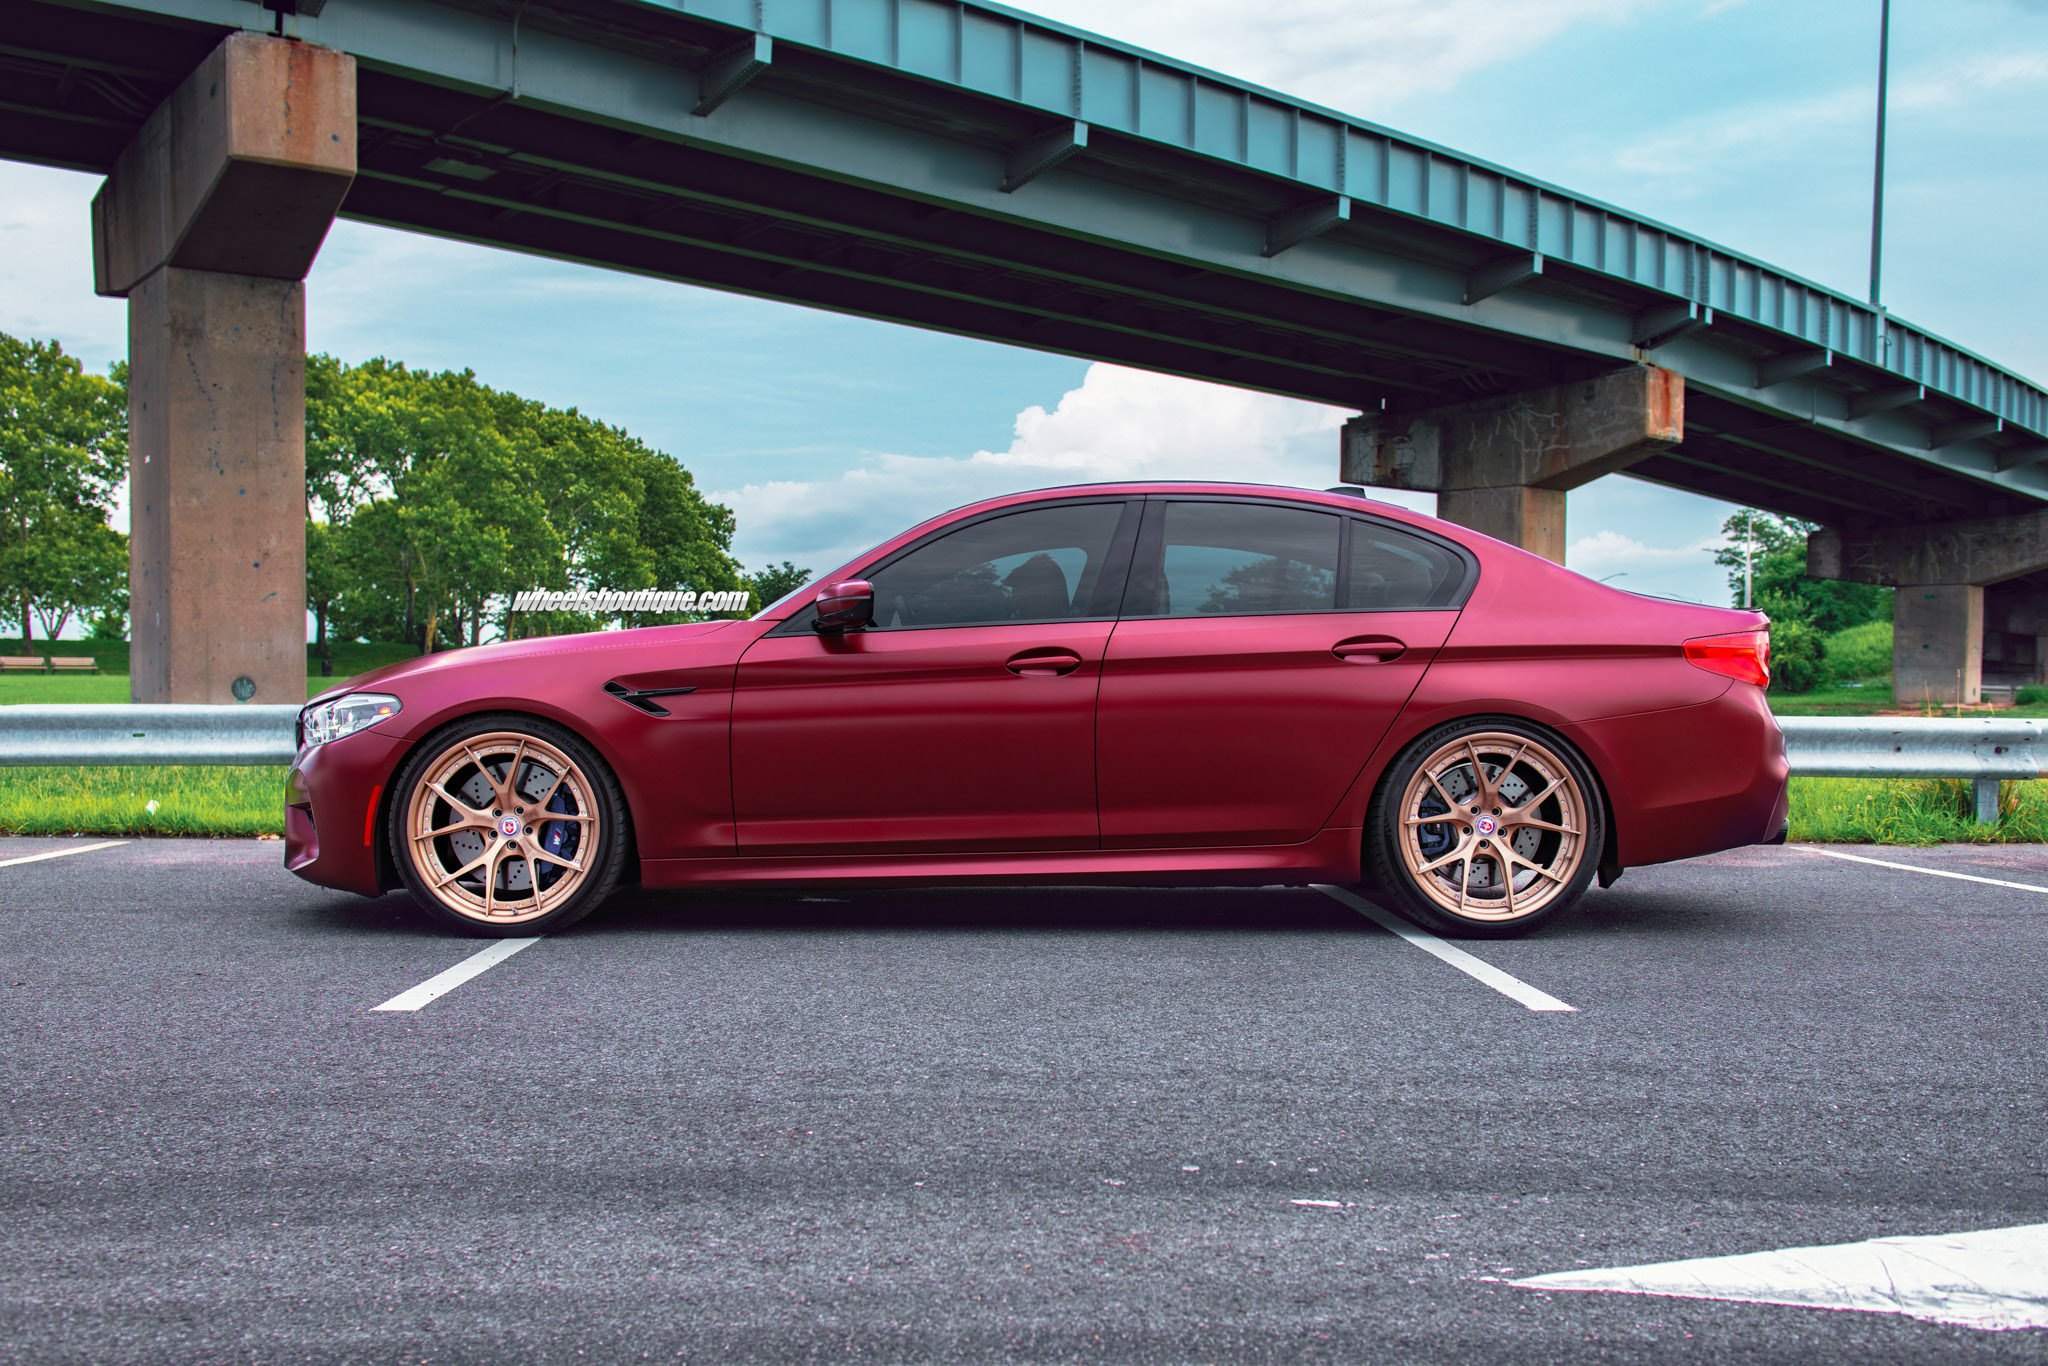 Aftermarket Side Skirts on Red BMW 5-Series - Photo by HRE Wheels